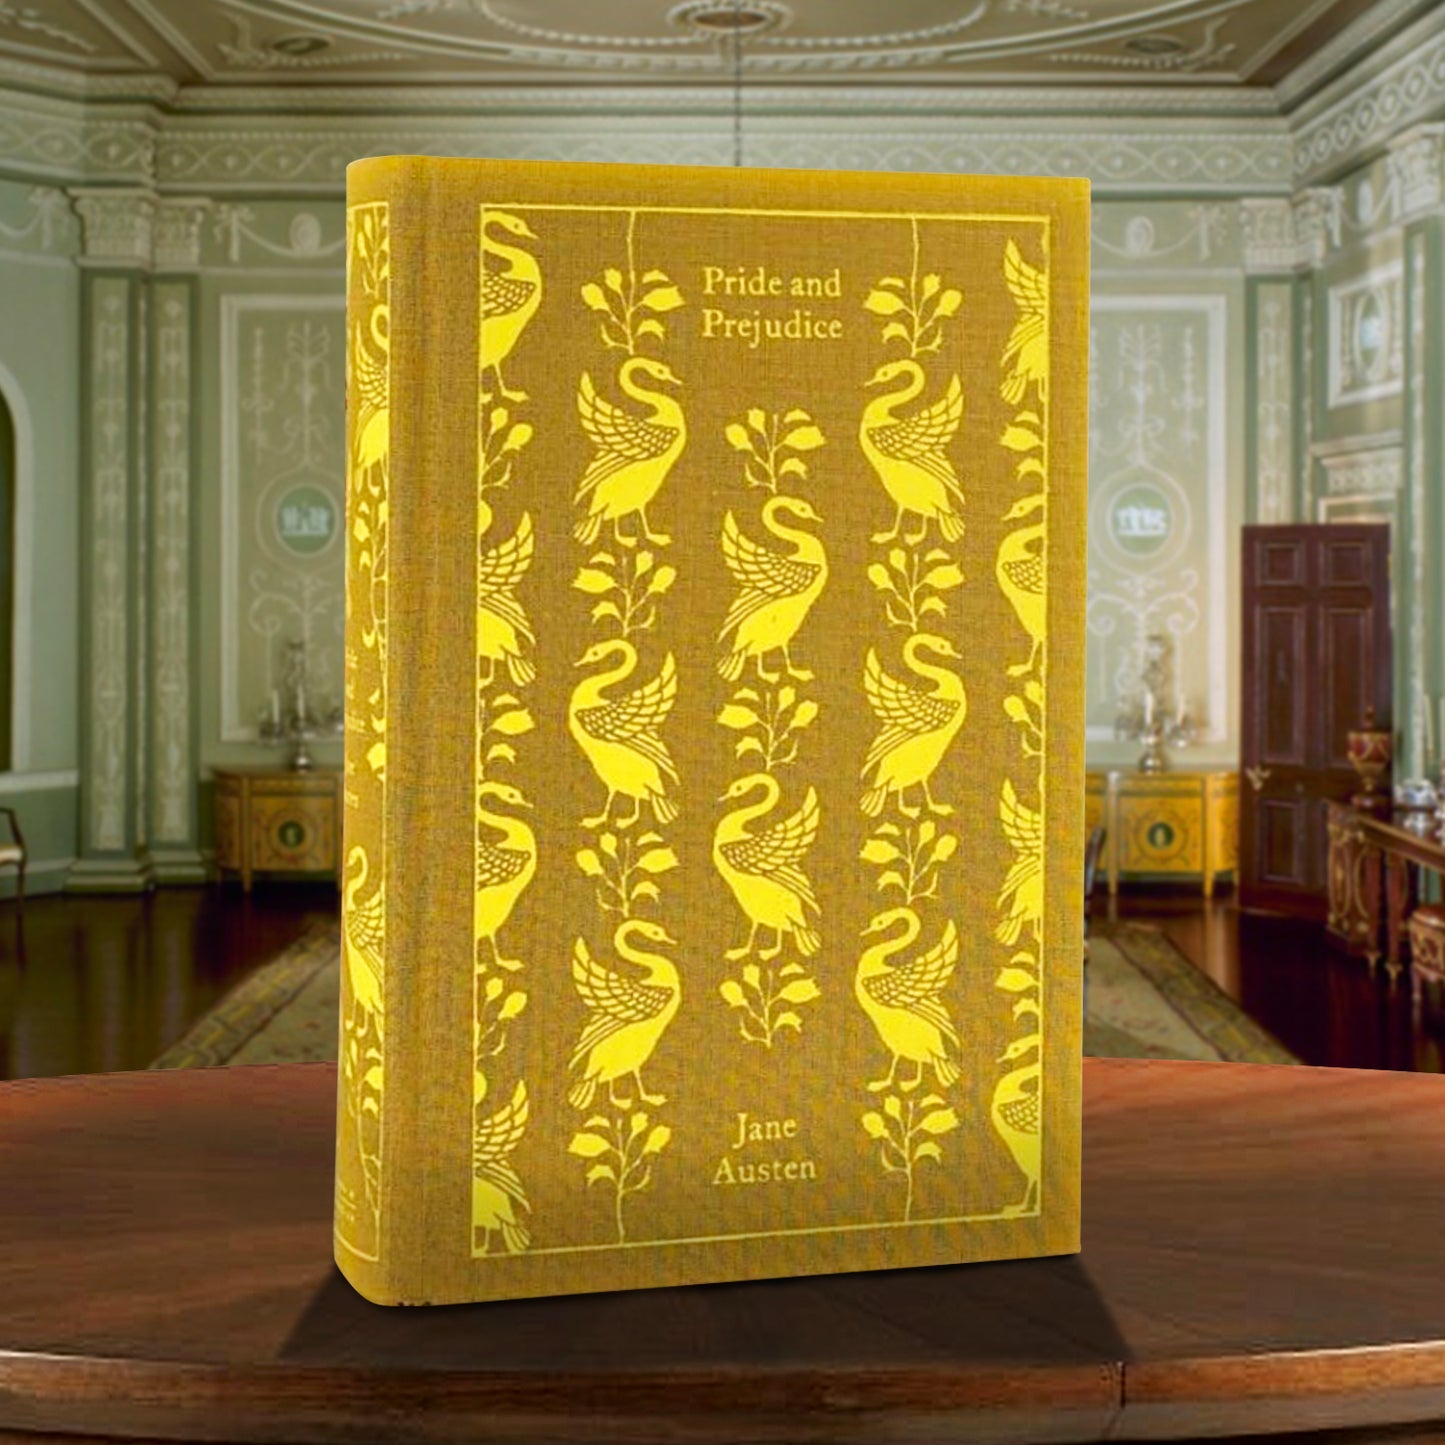 A yellow and gold book on a wooden table. The cover of the books depicts swans and lilies. Gold text at the top and bottom says "Pride and prejudice, Jane Austen." Behind the book is a sitting room in a mansion from the early 1800s.